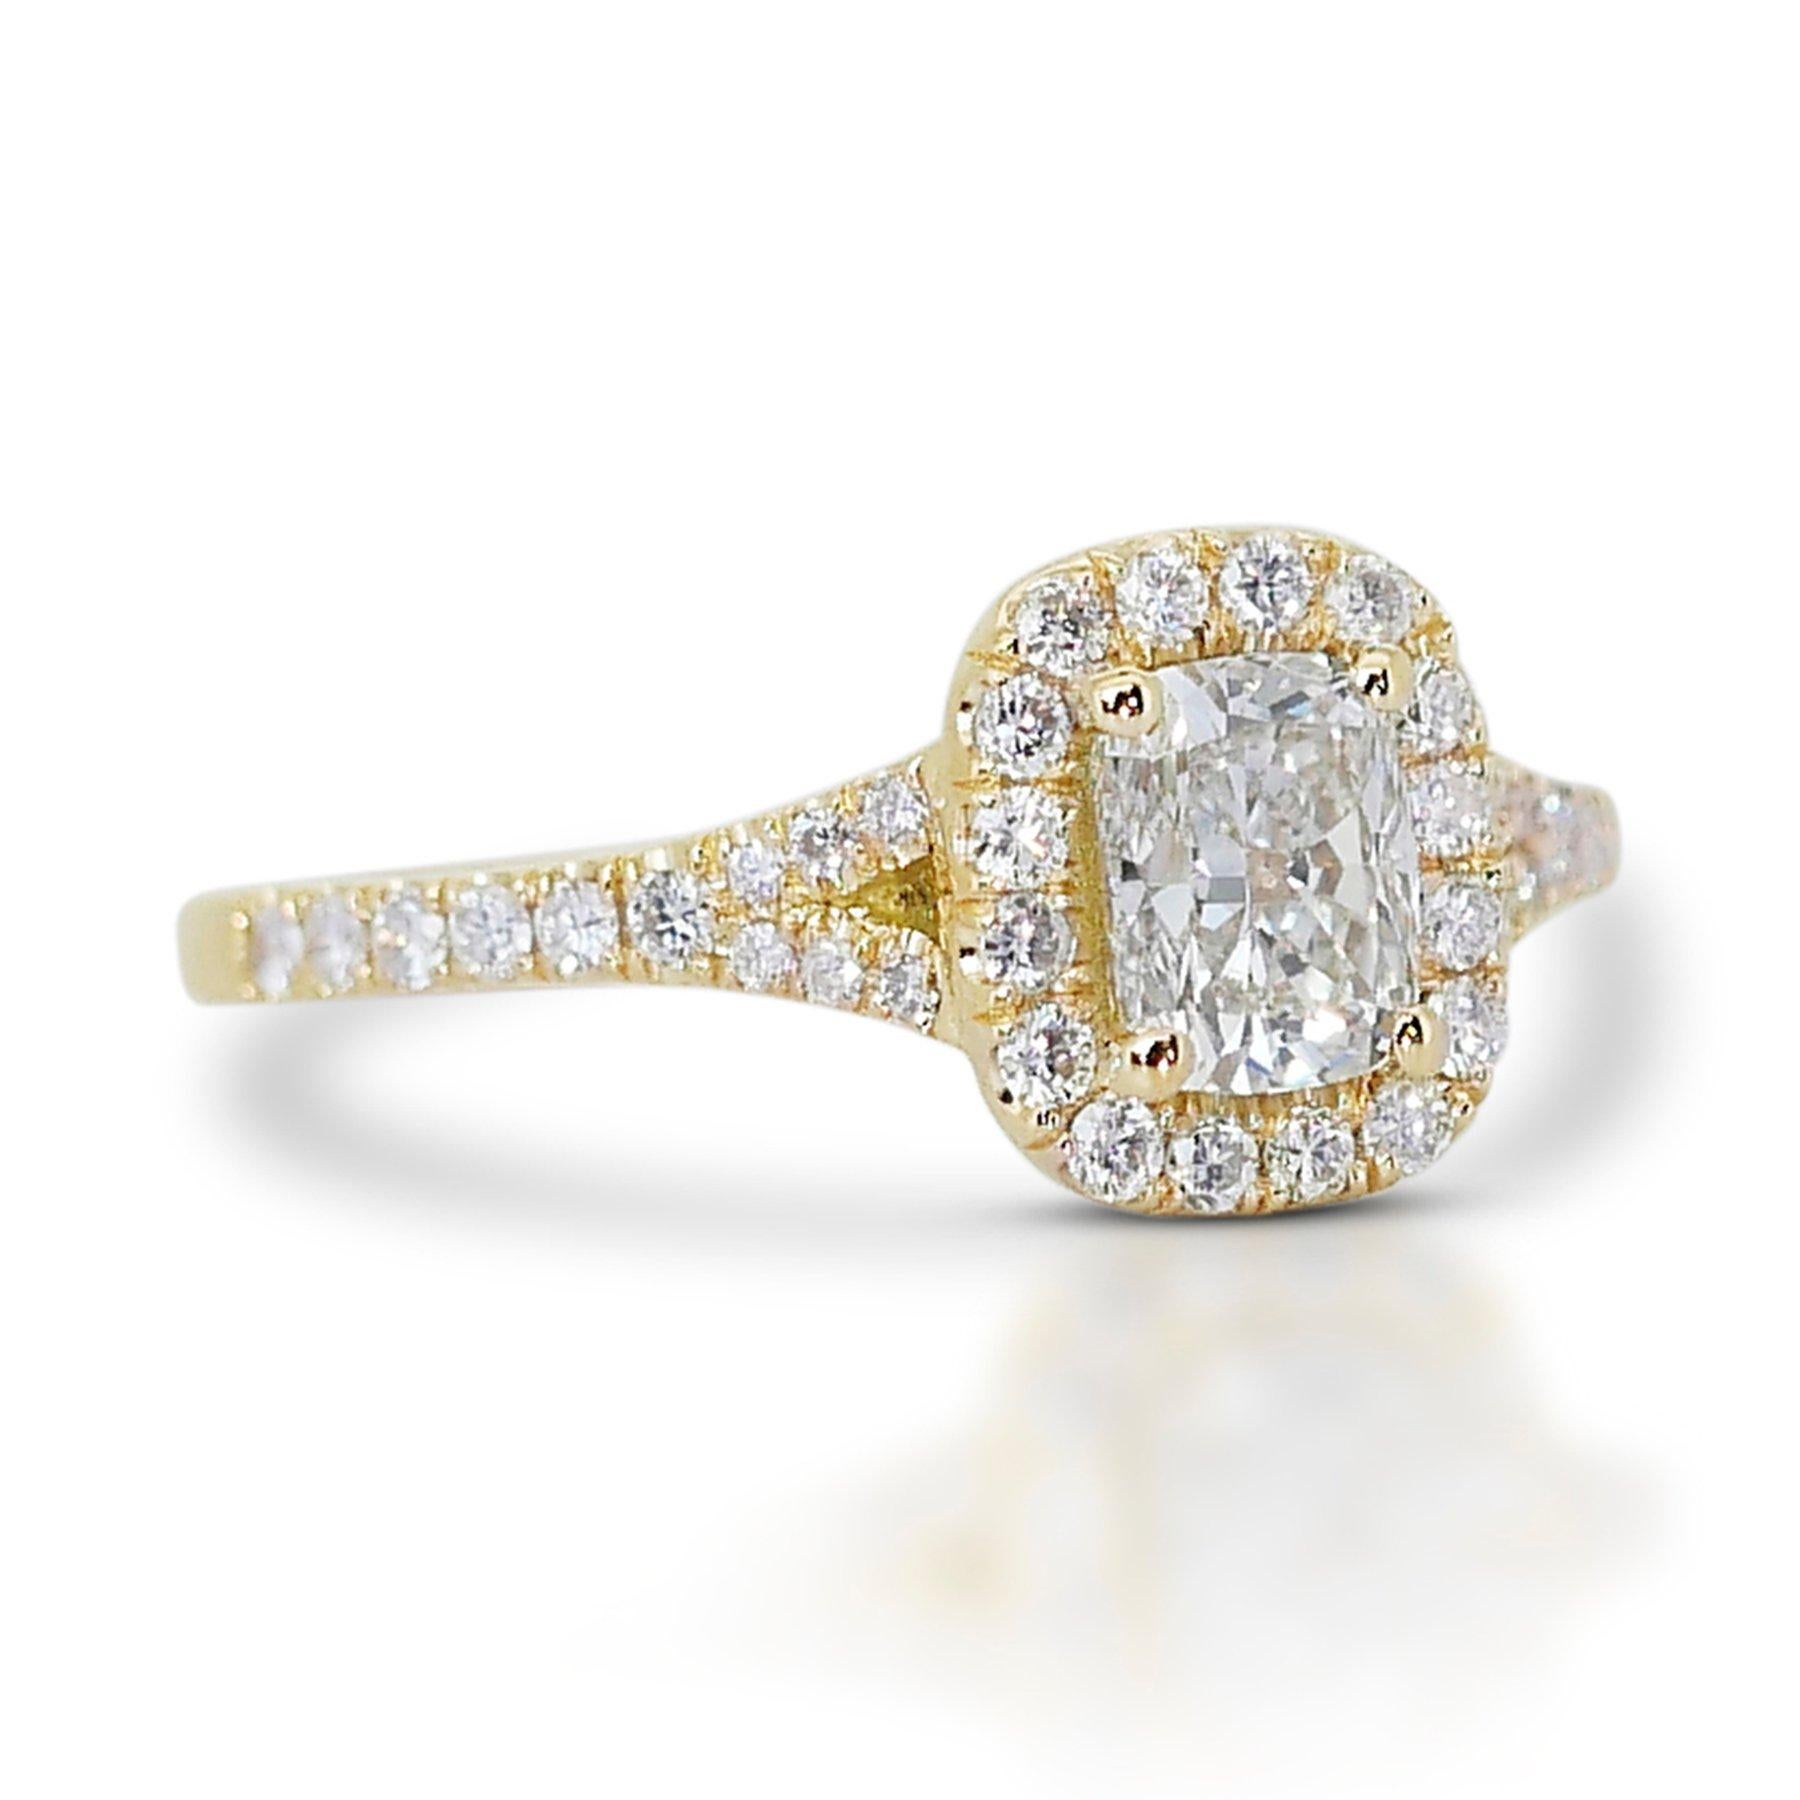 Brilliant 1.33ct Diamond Halo Ring in 18k Yellow Gold – GIA Certified

This exquisite 18k yellow gold ring exemplifies luxury with its 1.00-carat cushion-cut main diamond. Enhancing the centerpiece, 40 round side diamonds totaling 0.33 carats, add a